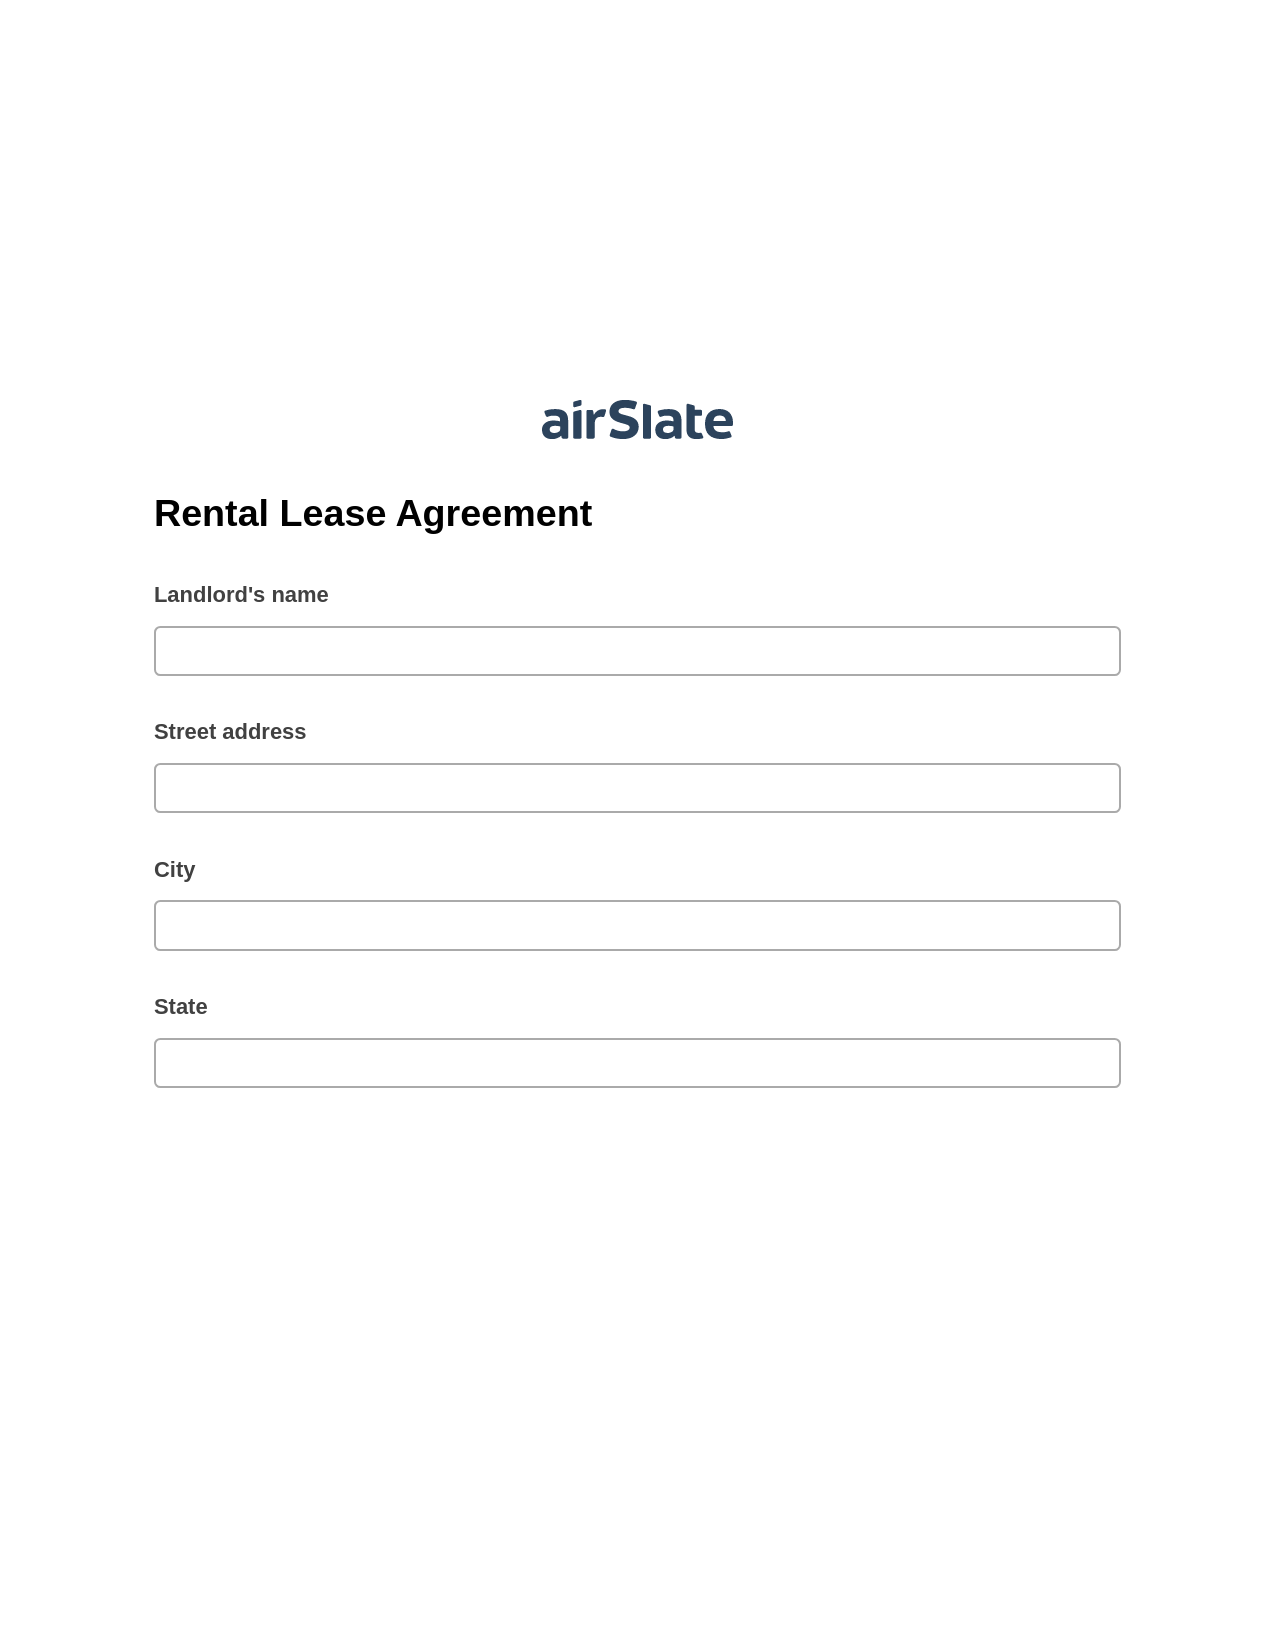 Rental Lease Agreement Pre-fill from Litmos bot, Document Hide Bot, Export to Excel 365 Bot